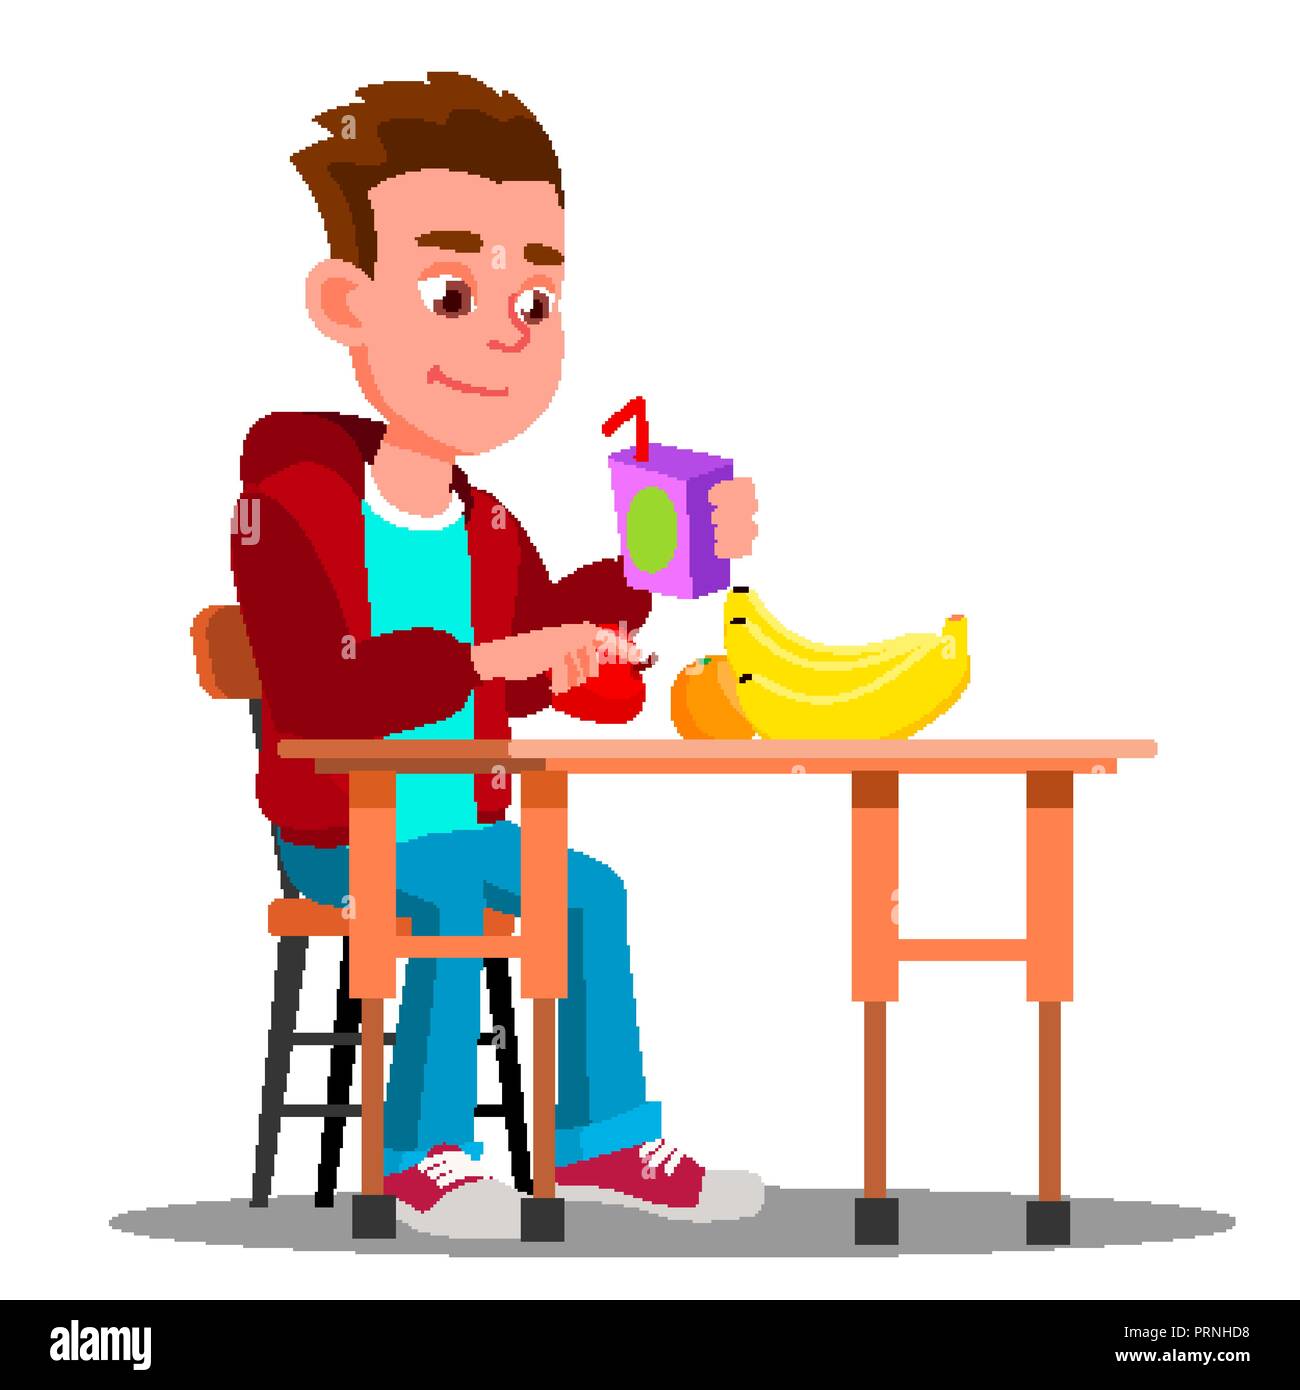 Child At The Dinner Table With Fruit And Juice In Hand Vector. Food. Isolated Illustration Stock Vector